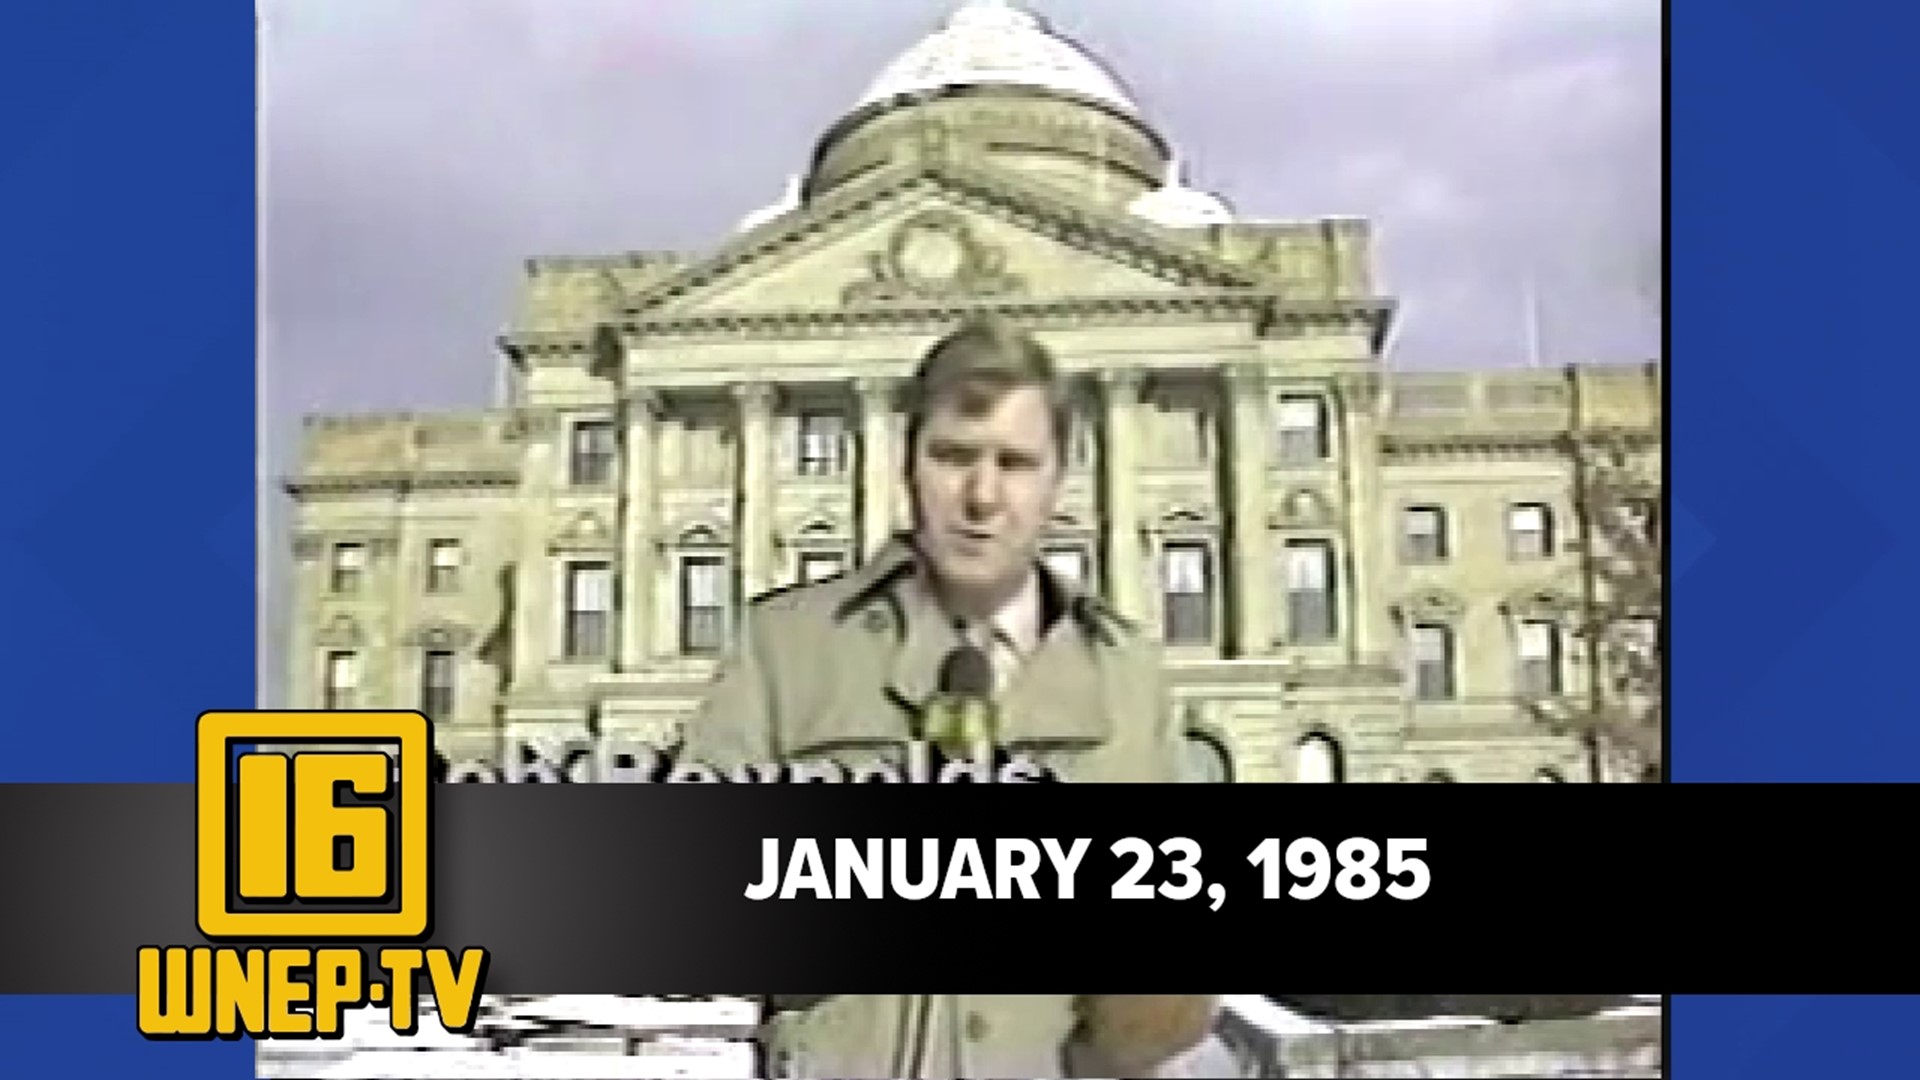 Join Frank Andrews with curated stories from January 23, 1985.